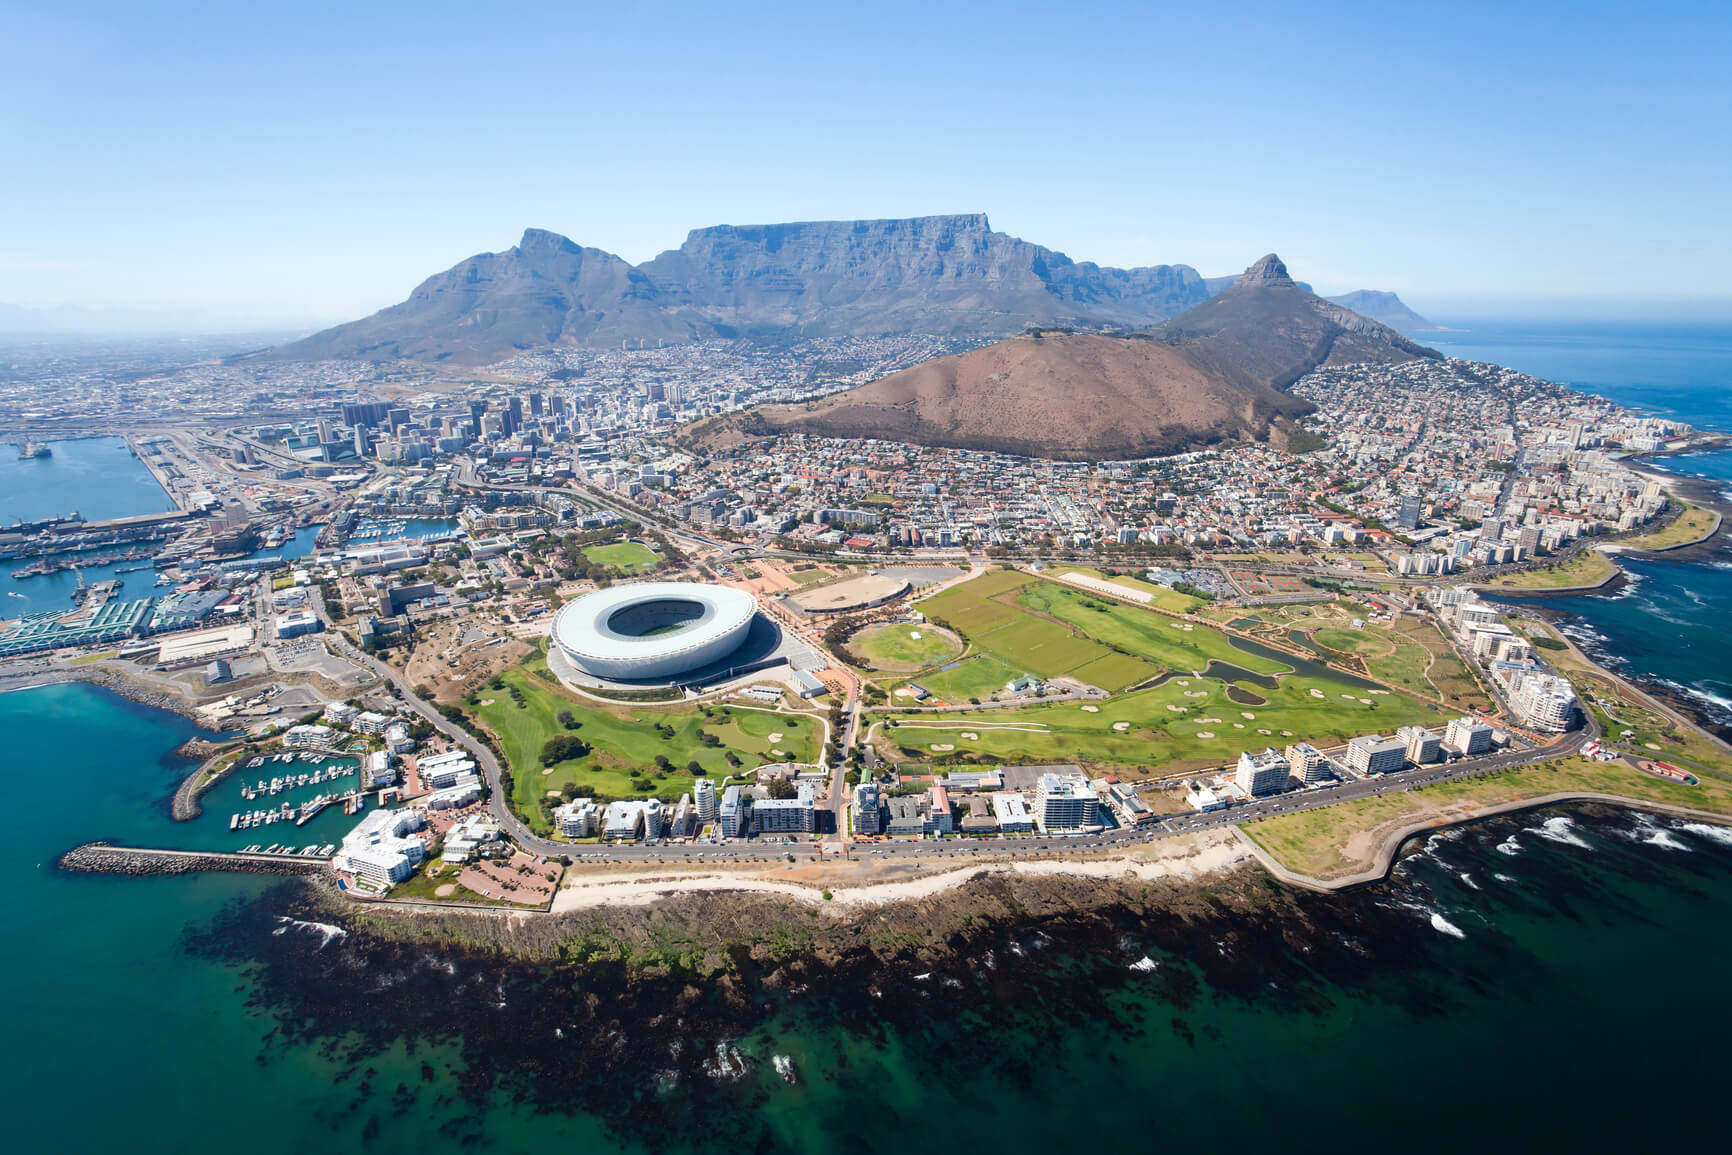 Flight deals from UK cities to Cape Town, South Africa | Secret Flying